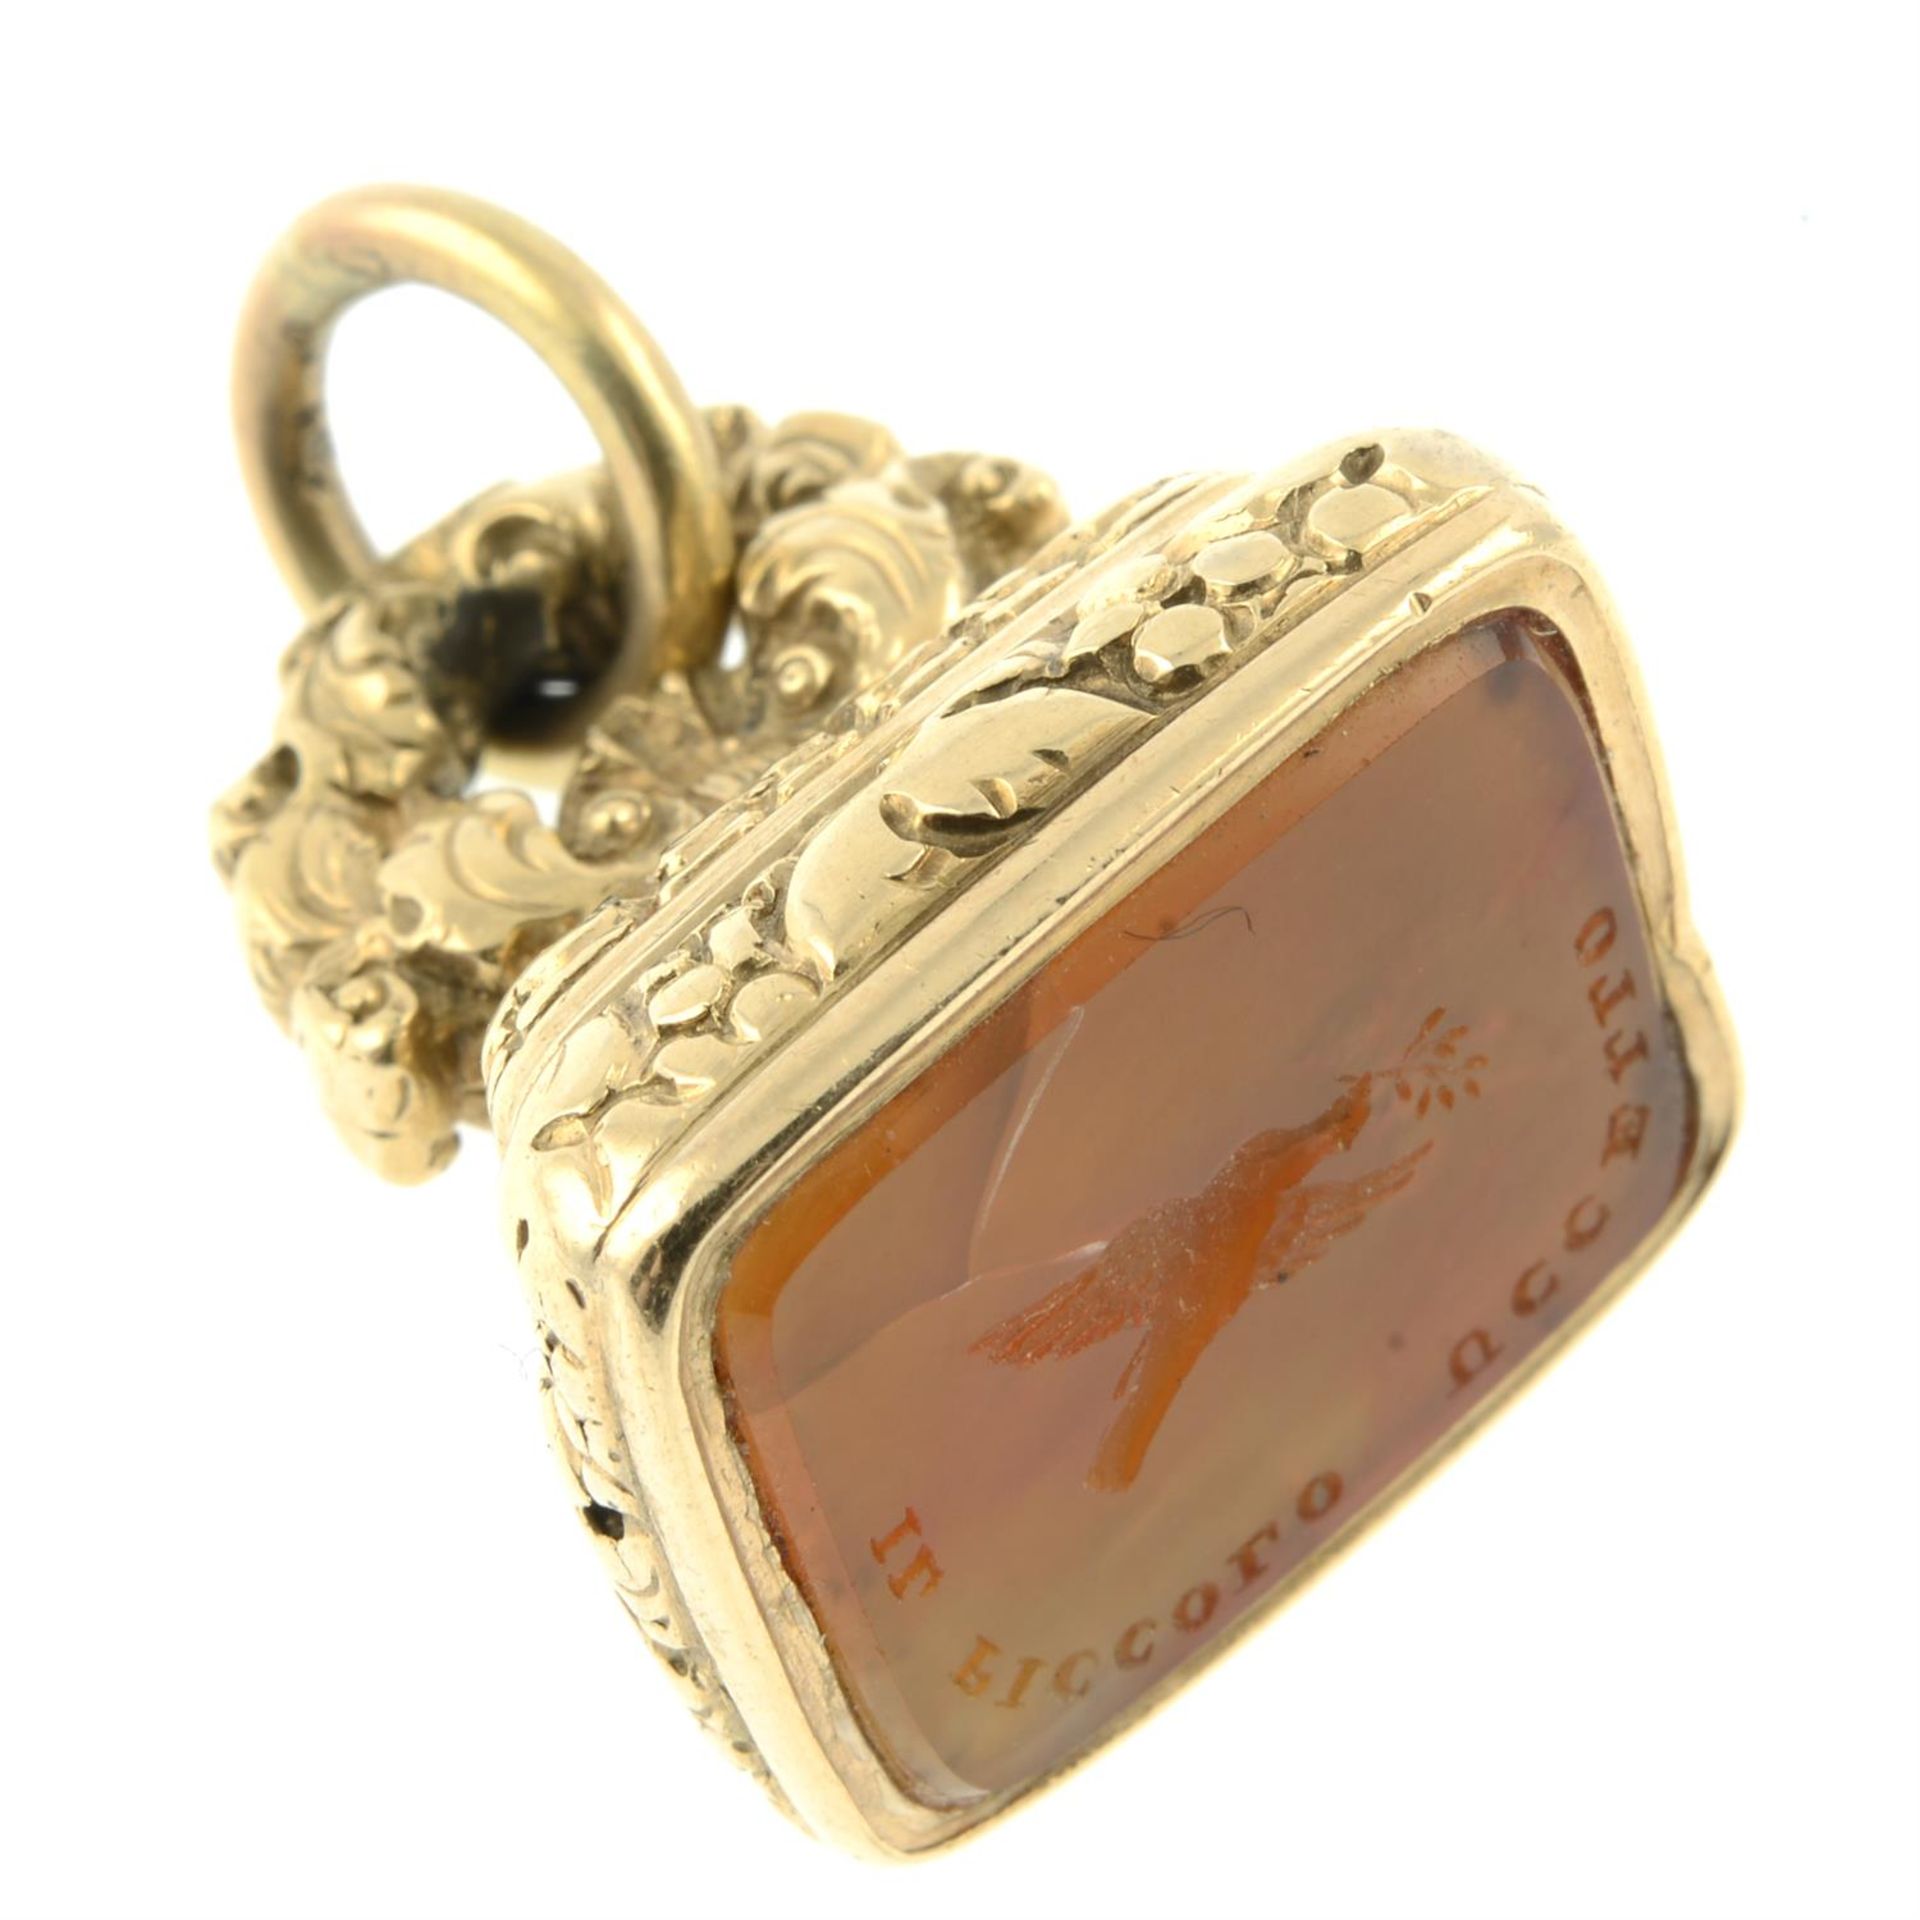 A 19th century gold agate 'a little bird told me' fob seal, engraved with a dove holding an olive - Image 2 of 4